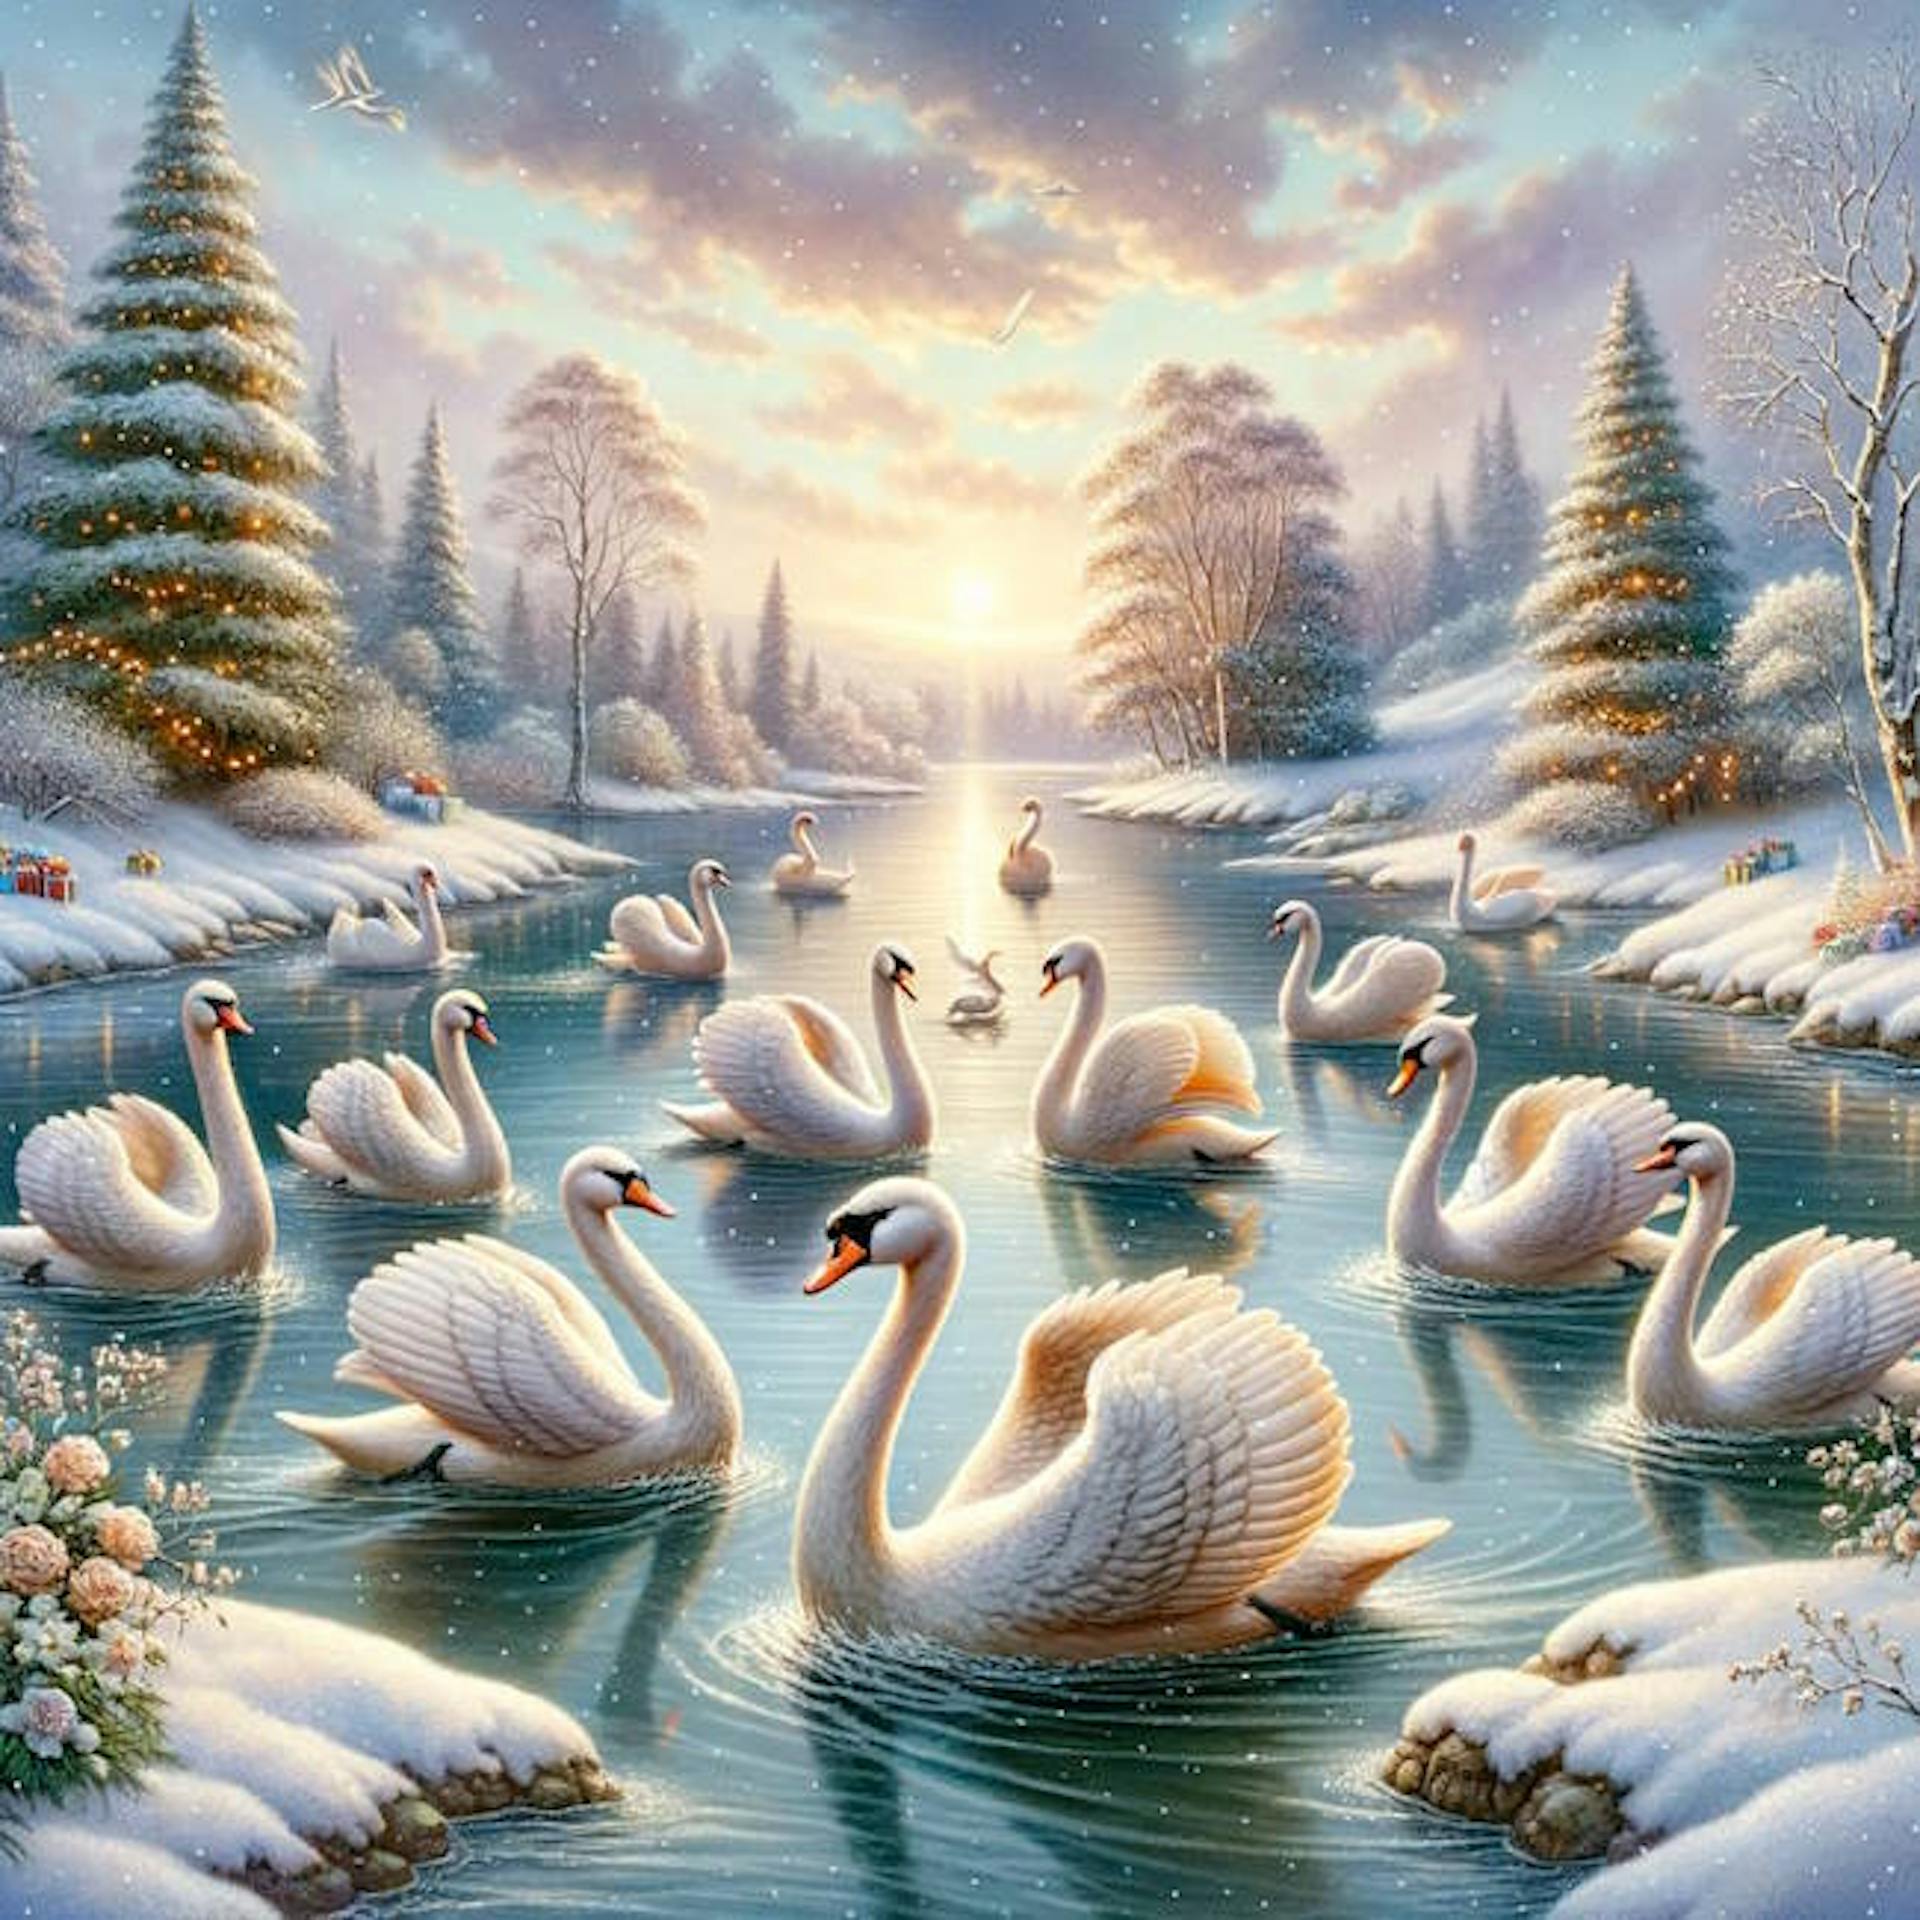 seven swans a-swimming